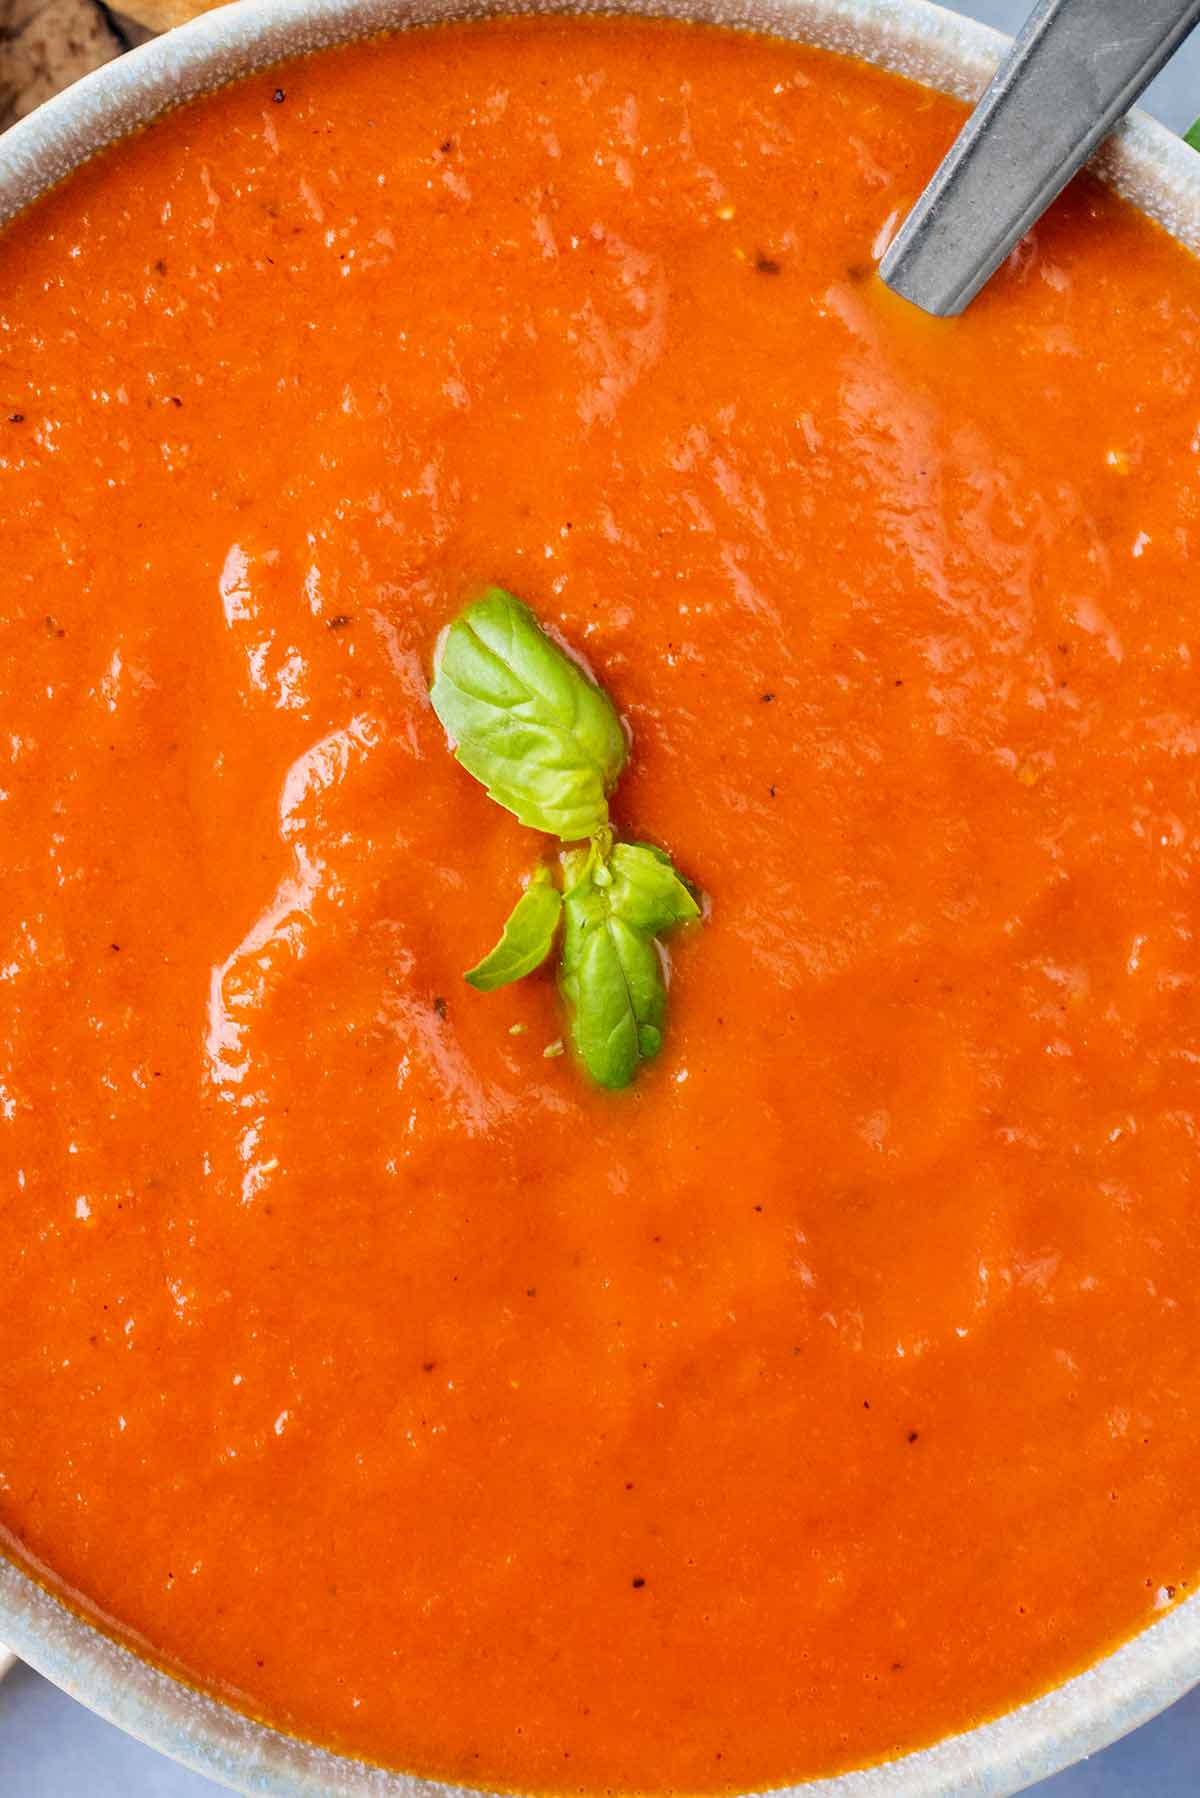 Four small basil leaves on top of some tomato soup.